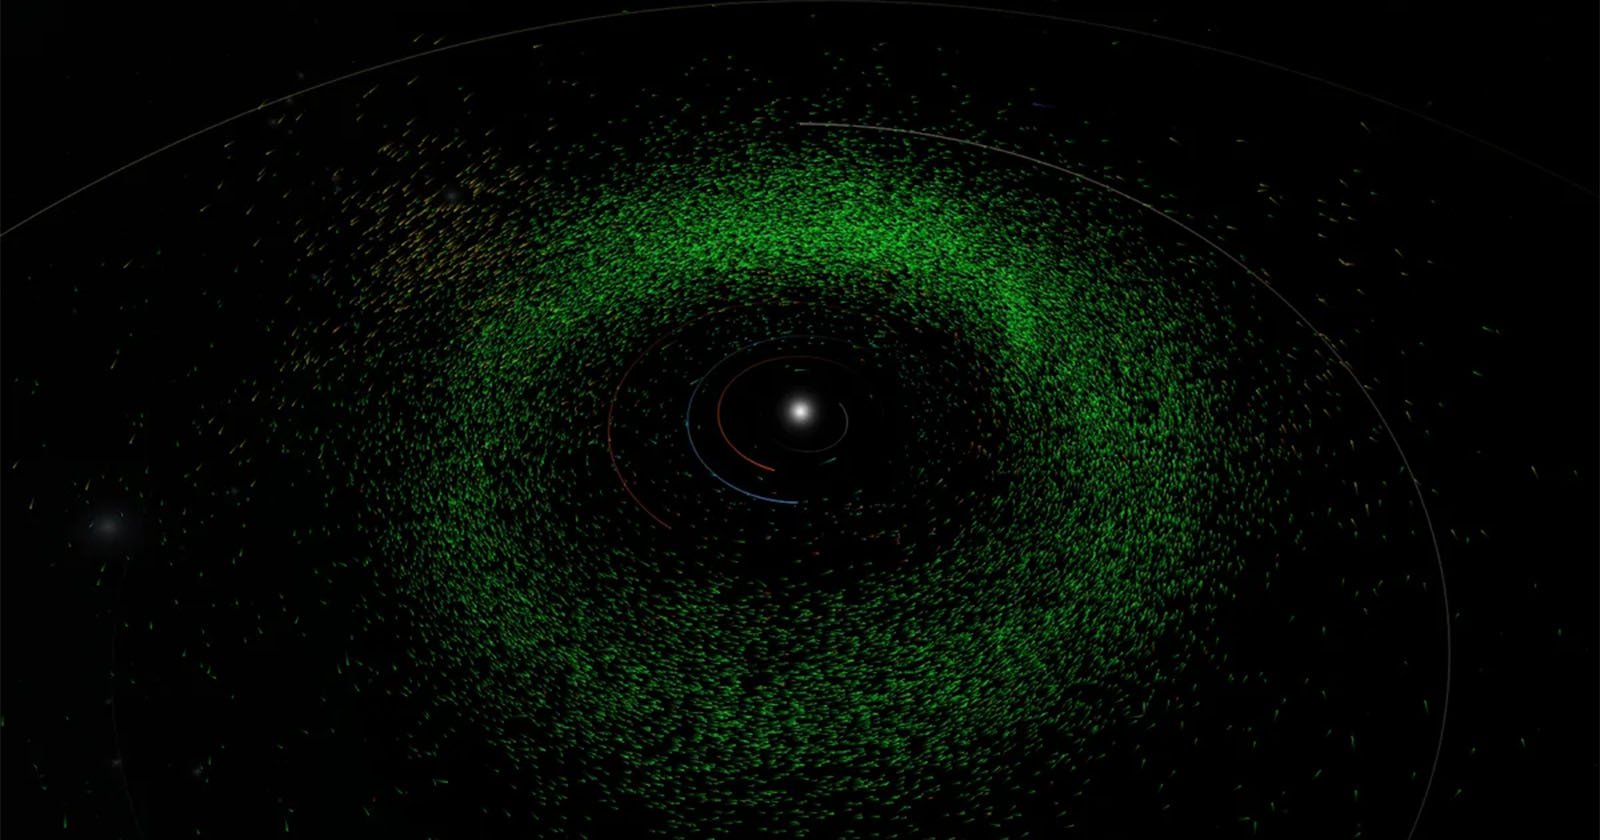 Artificial intelligence finds nearly 30,000 unknown asteroids in existing telescope images